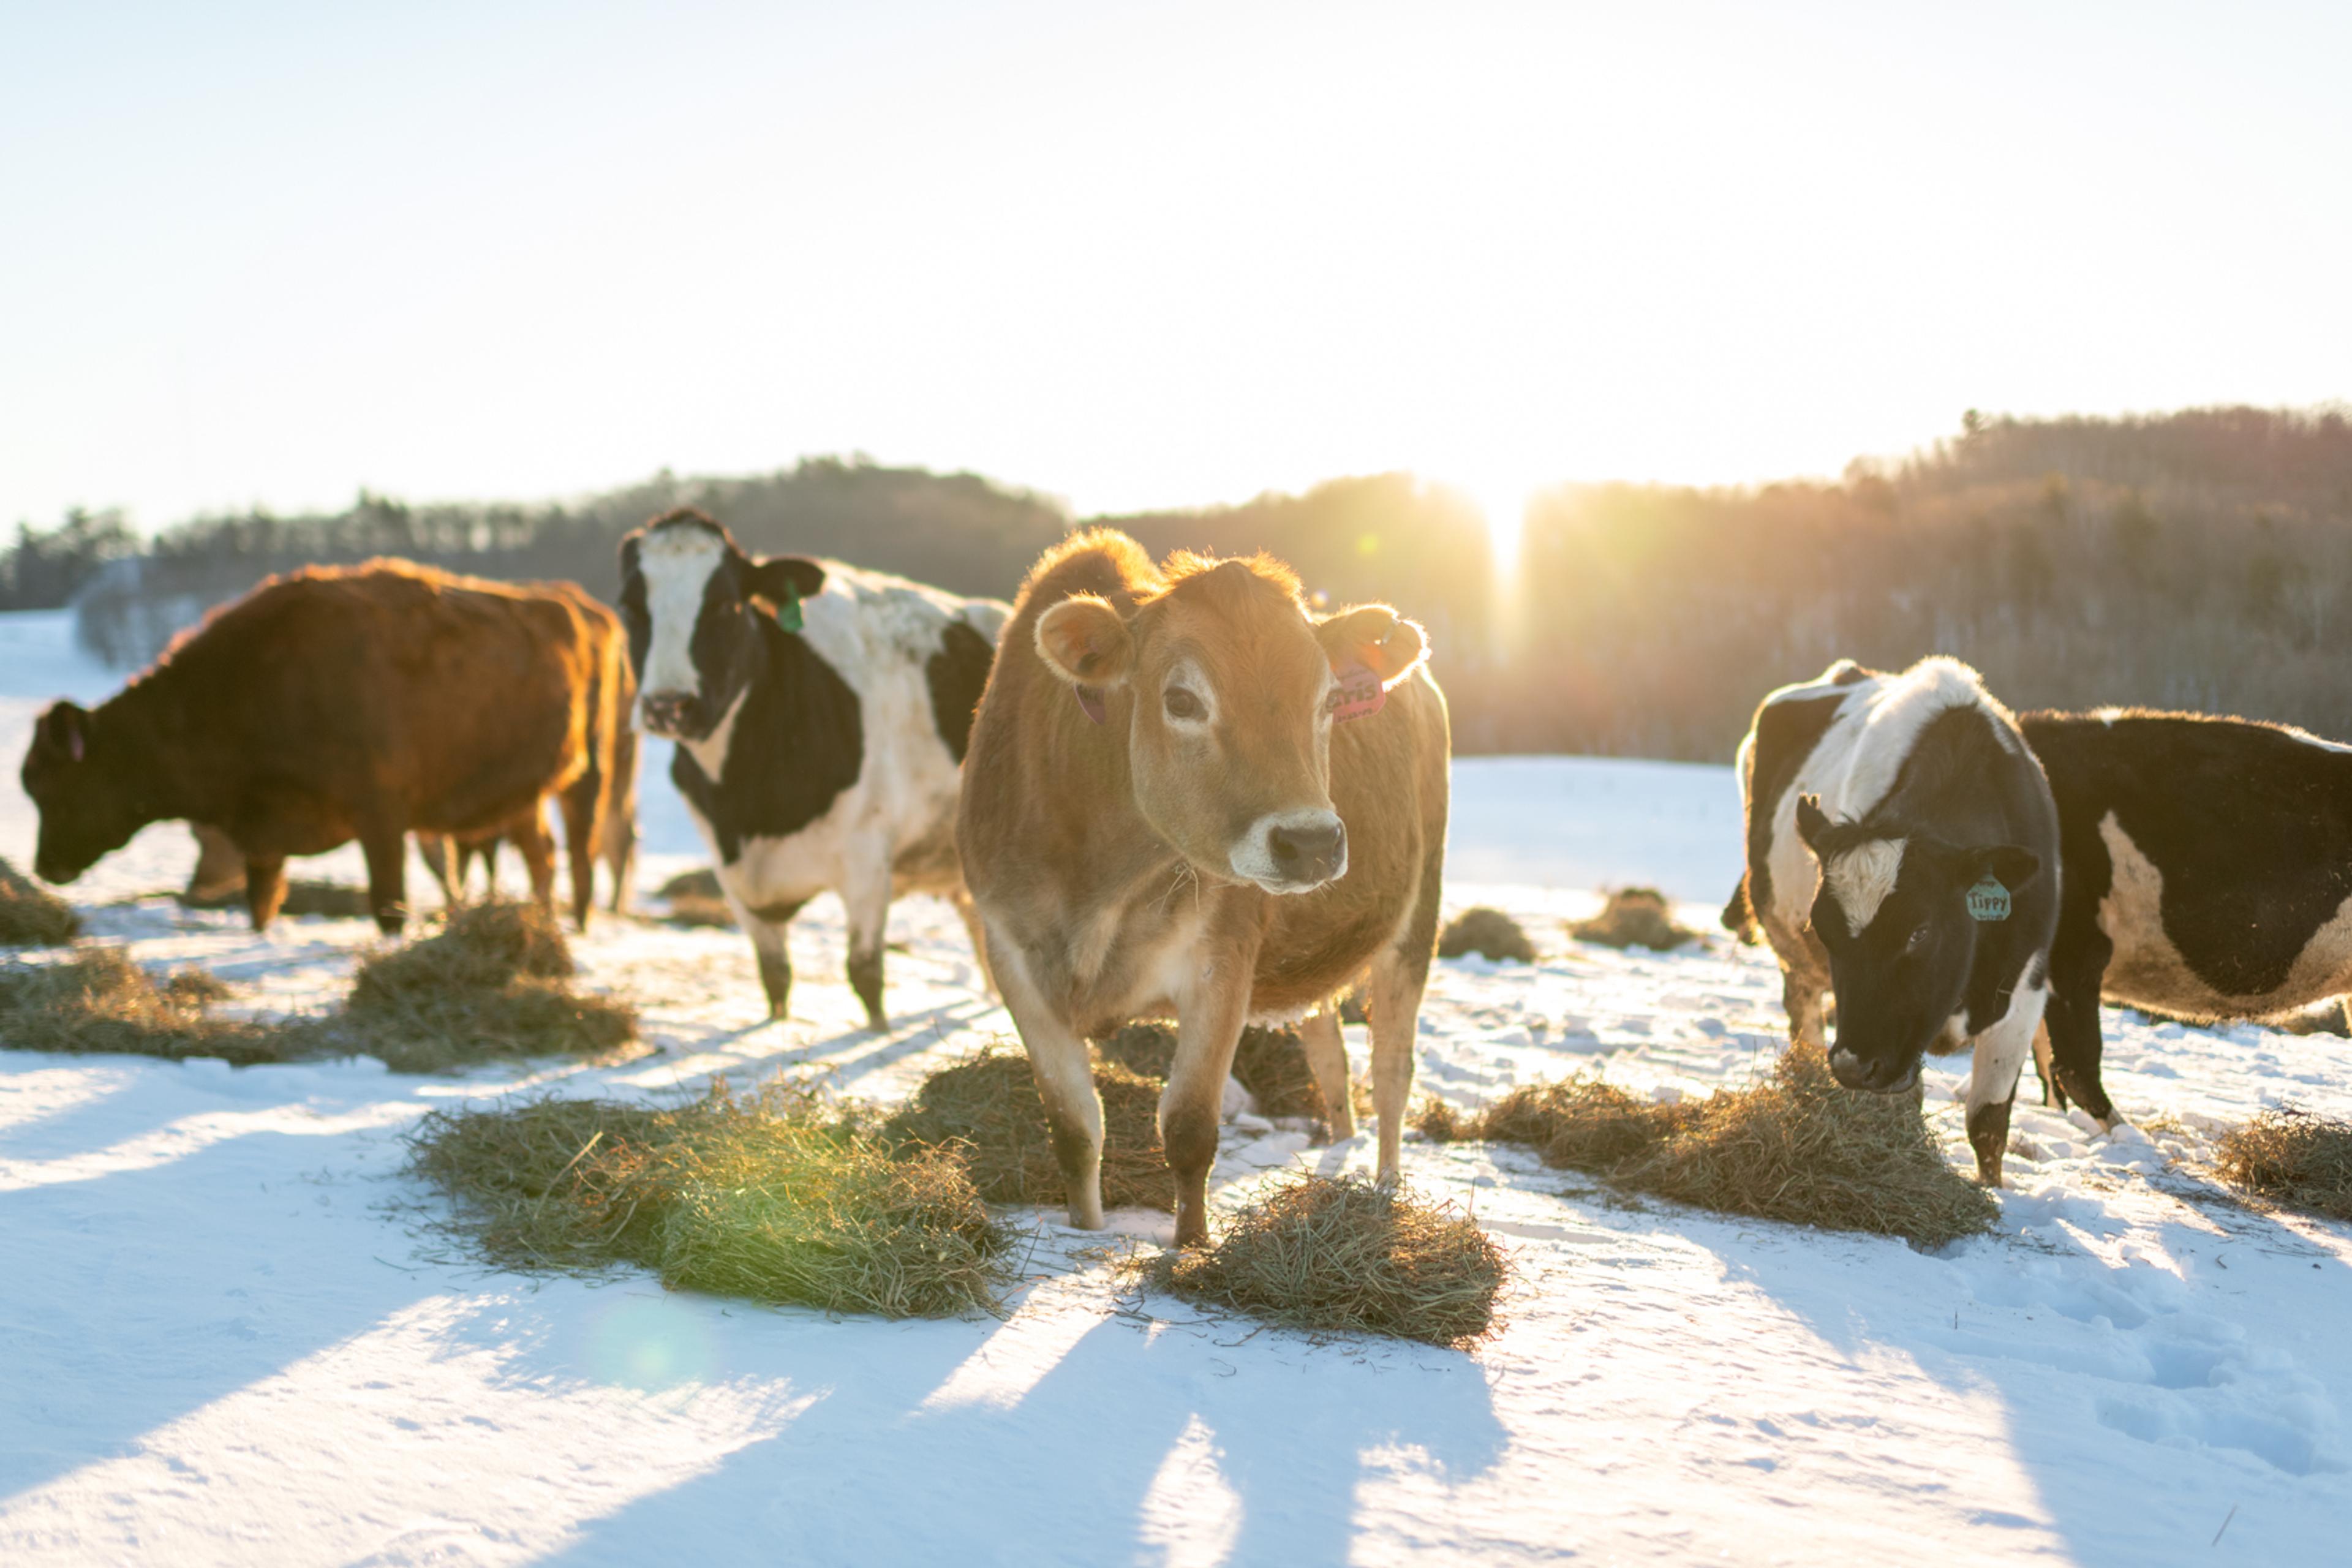 Cows eat piles of dried hay out on a snowy pasture on a sunny day.